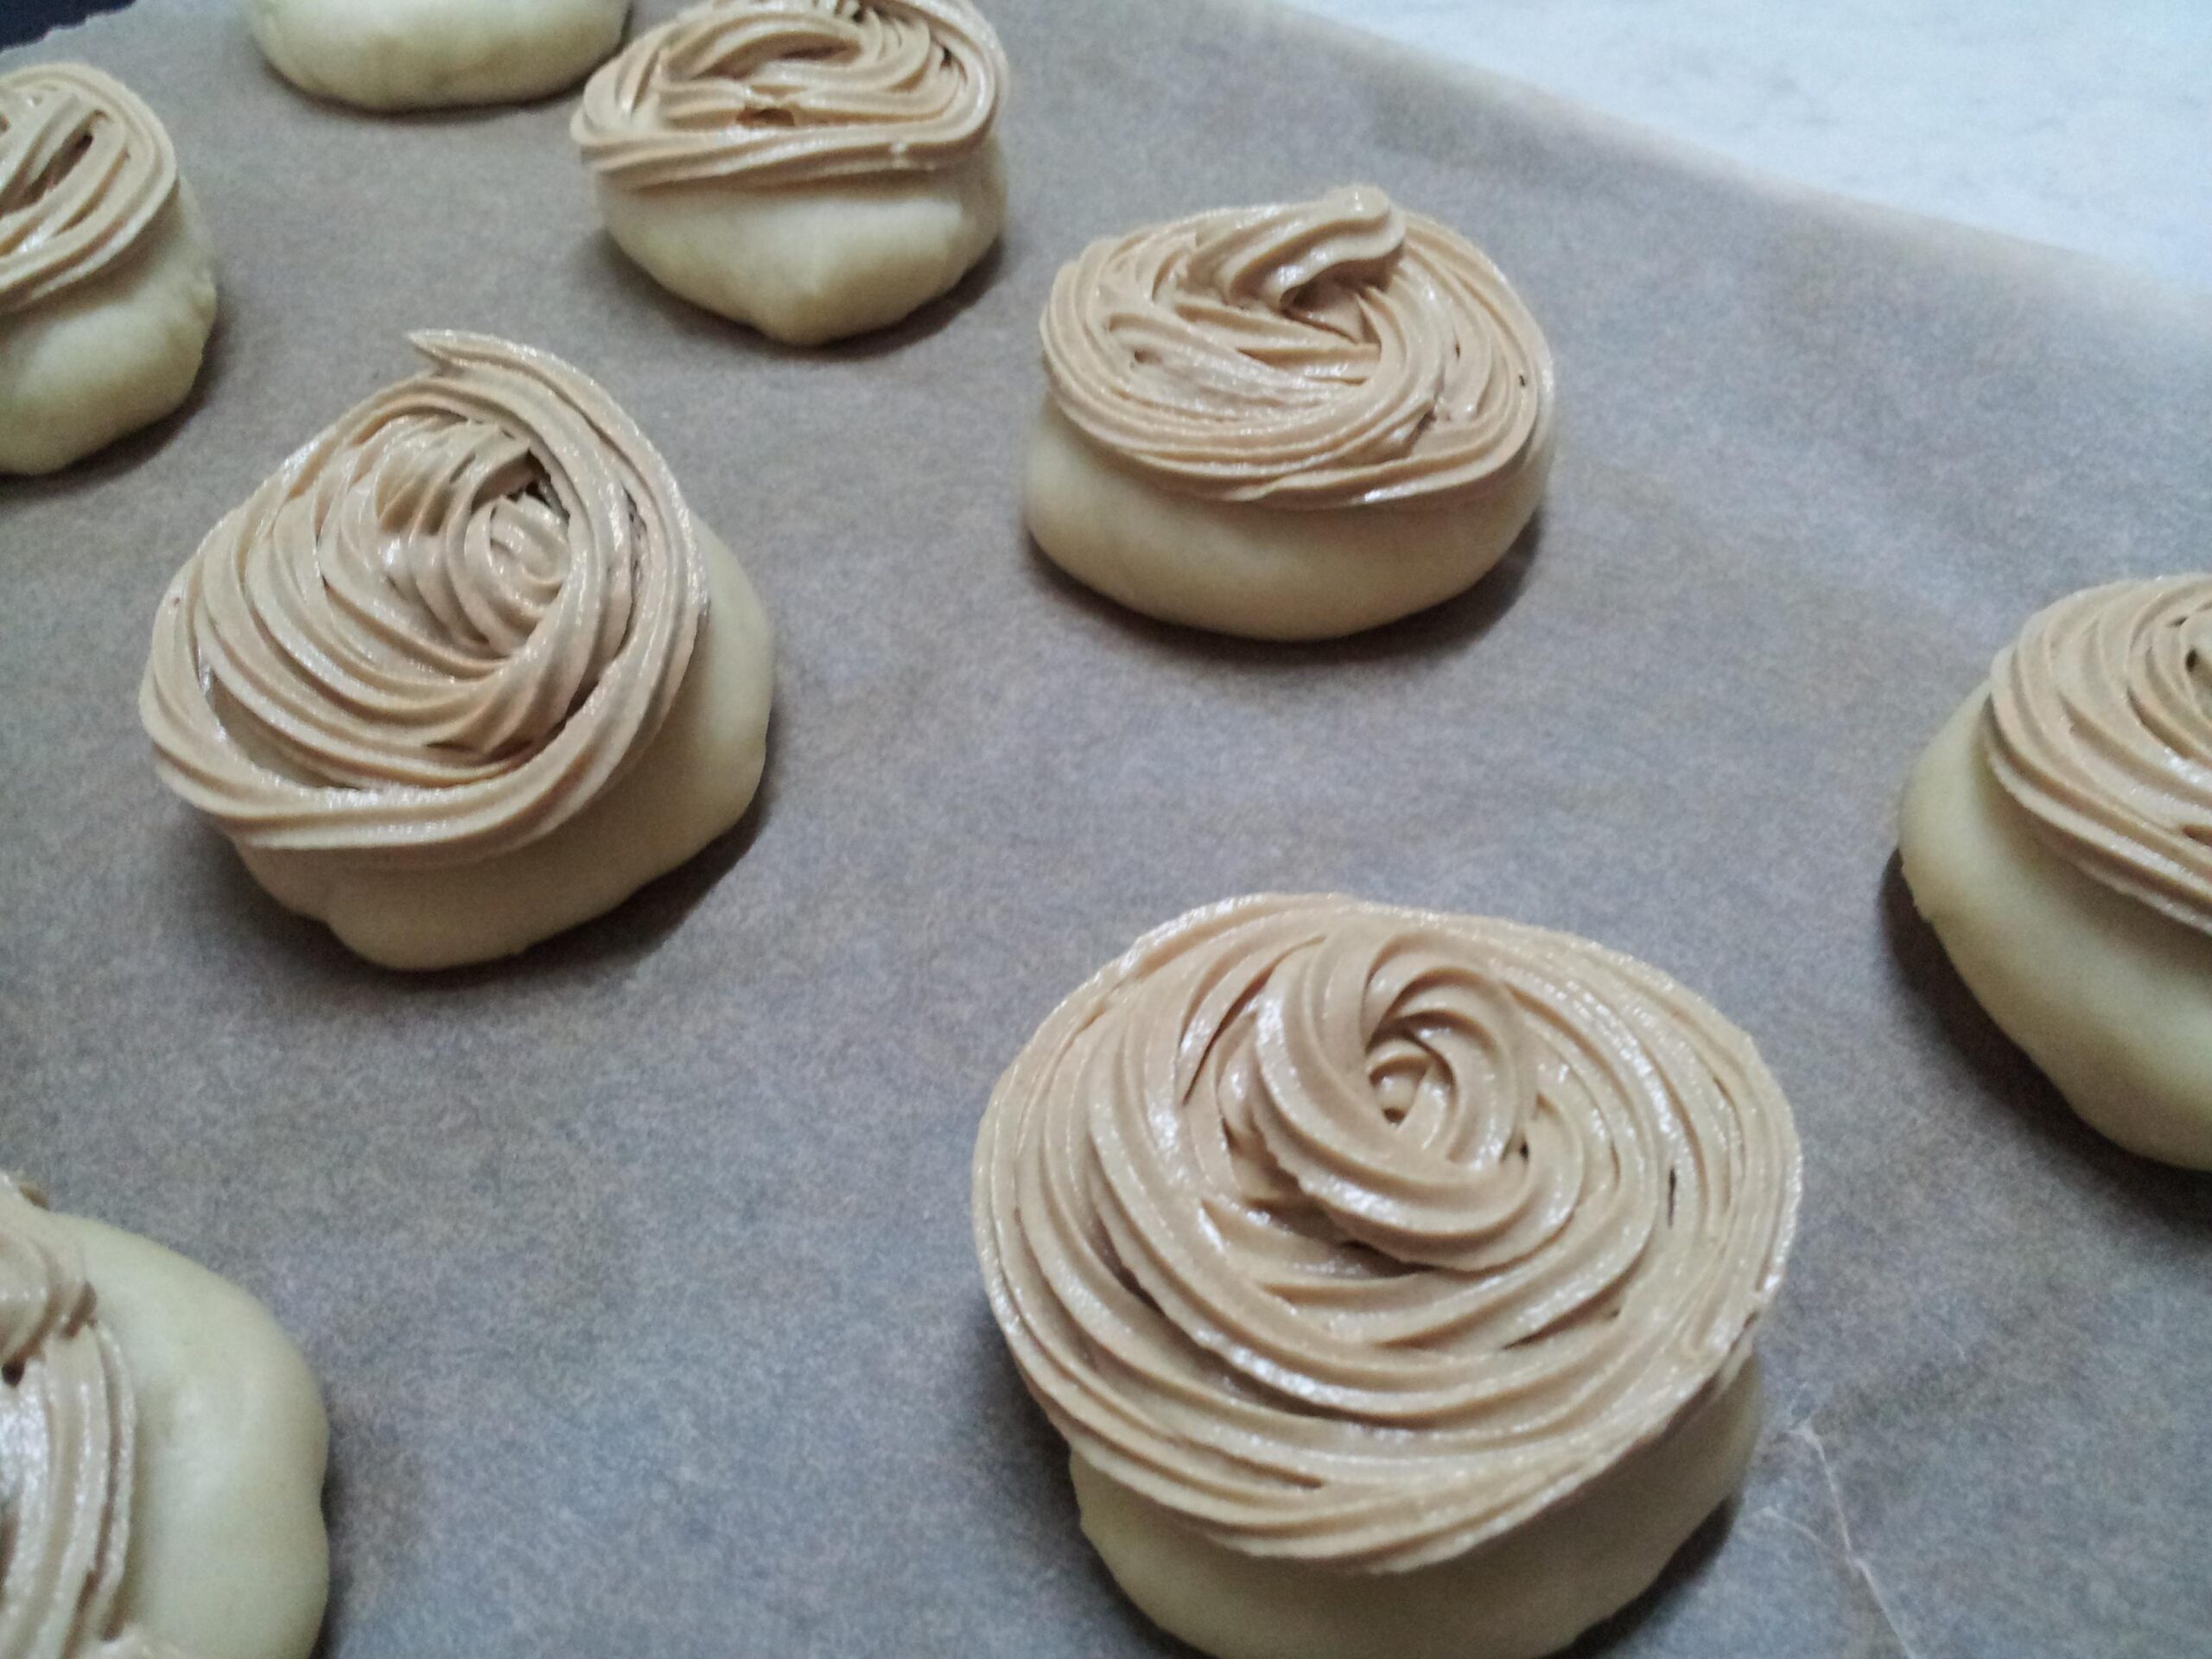  A heavenly aroma fills the air as fresh-out-of-oven coffee buns await their debut